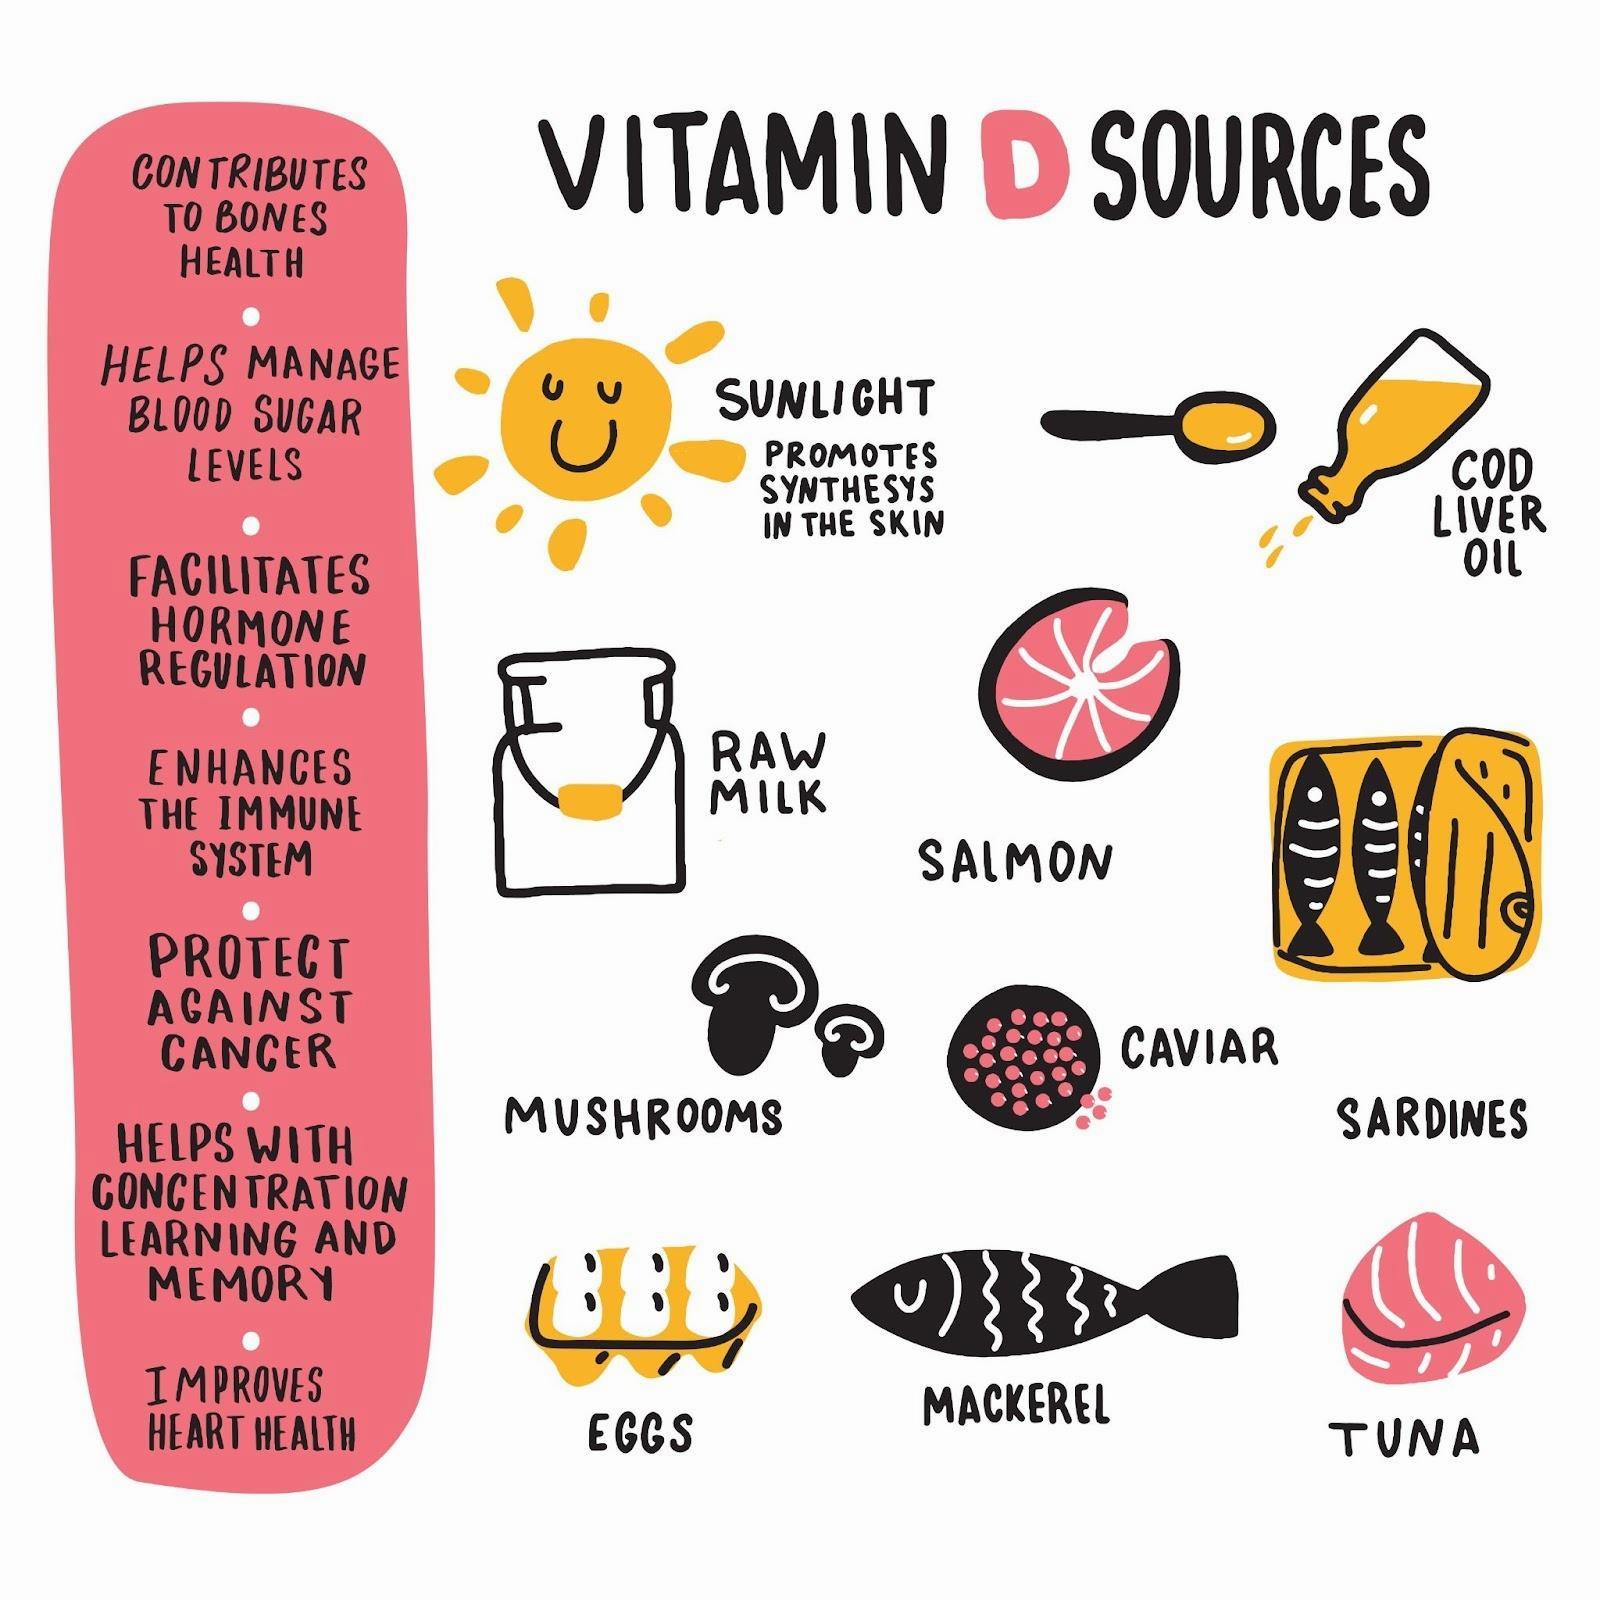 A hand-drawn infographic on the sources of vitamin D.